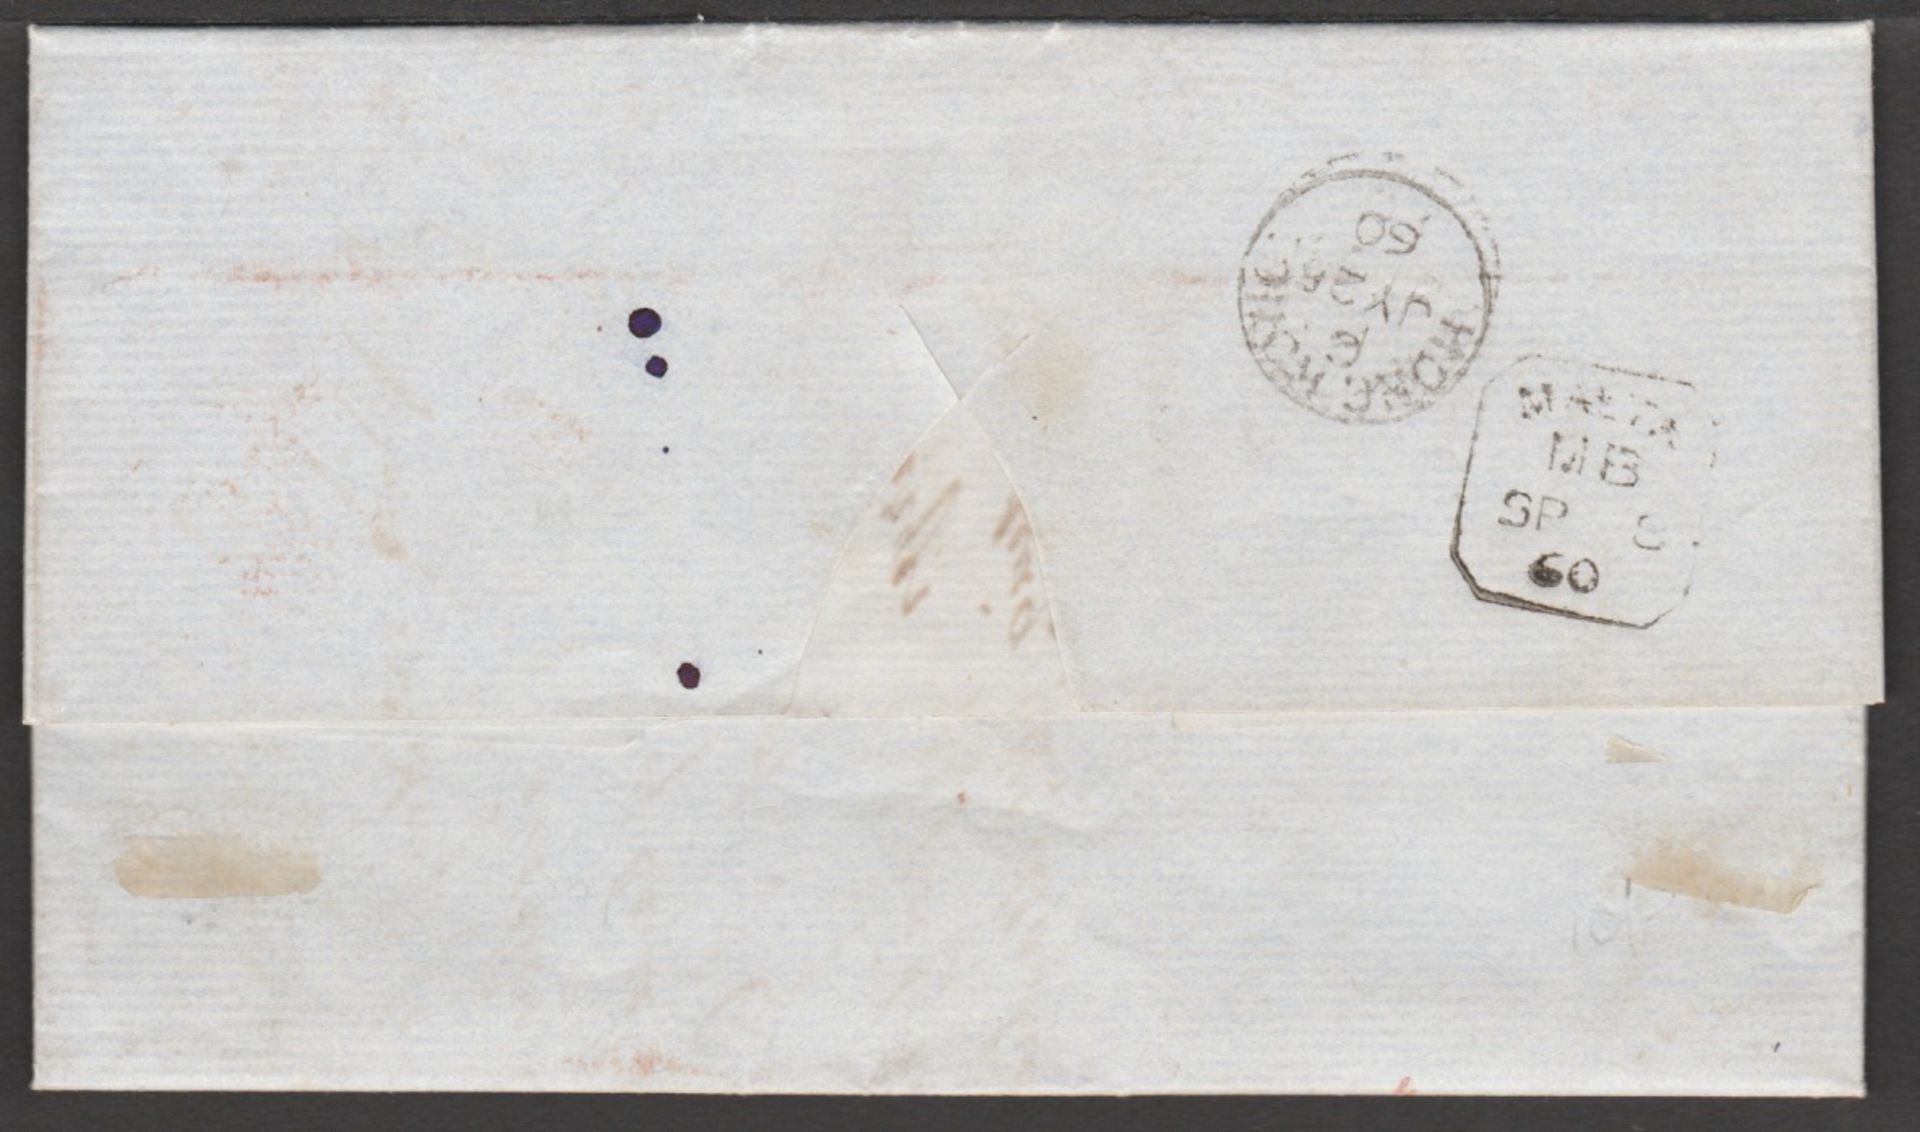 Hong Kong / Malta 1860 Entire letter prepaid 1/- from Hong Kong to Marseille endorsed ""Per Singapor - Image 3 of 3